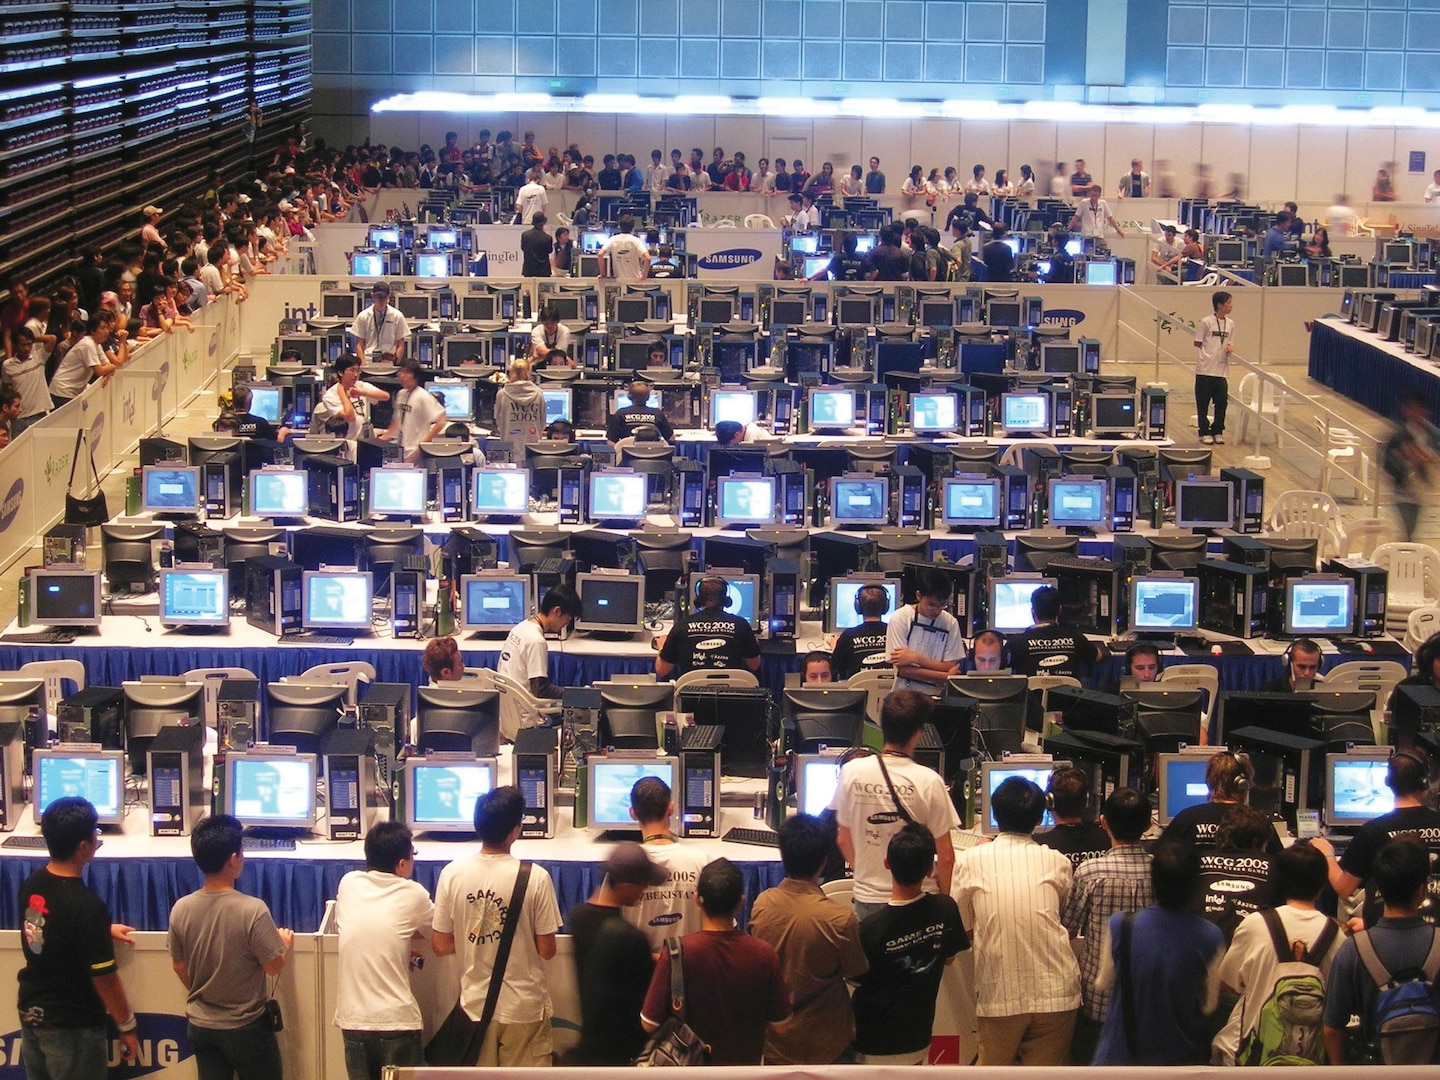 World Cyber Games Finals in Singapore 2005 (Conew at Polish Wikipedia
https://commons.wikimedia.org/wiki/File:World_Cyber_Games,_Singapore,_2005.jpg)